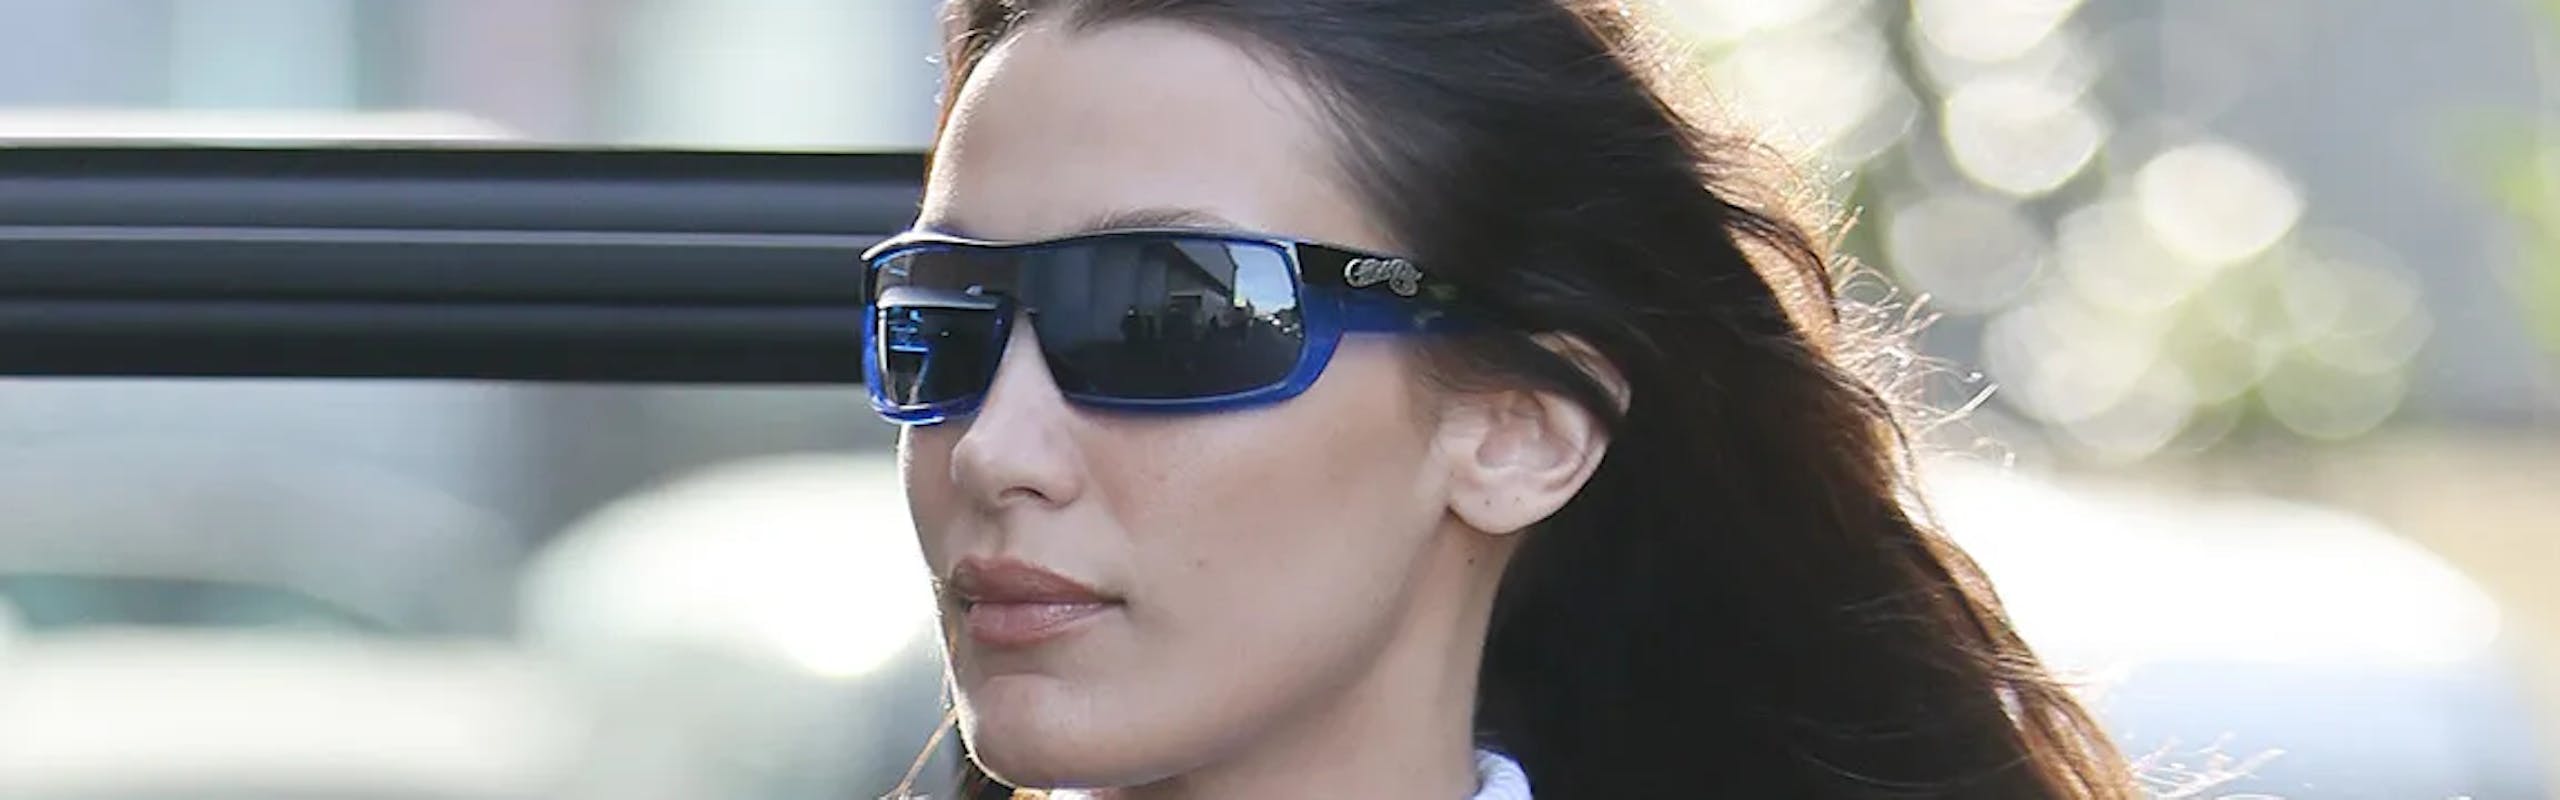 Bella Hadid photographed while wearing sunglasses and a jacket